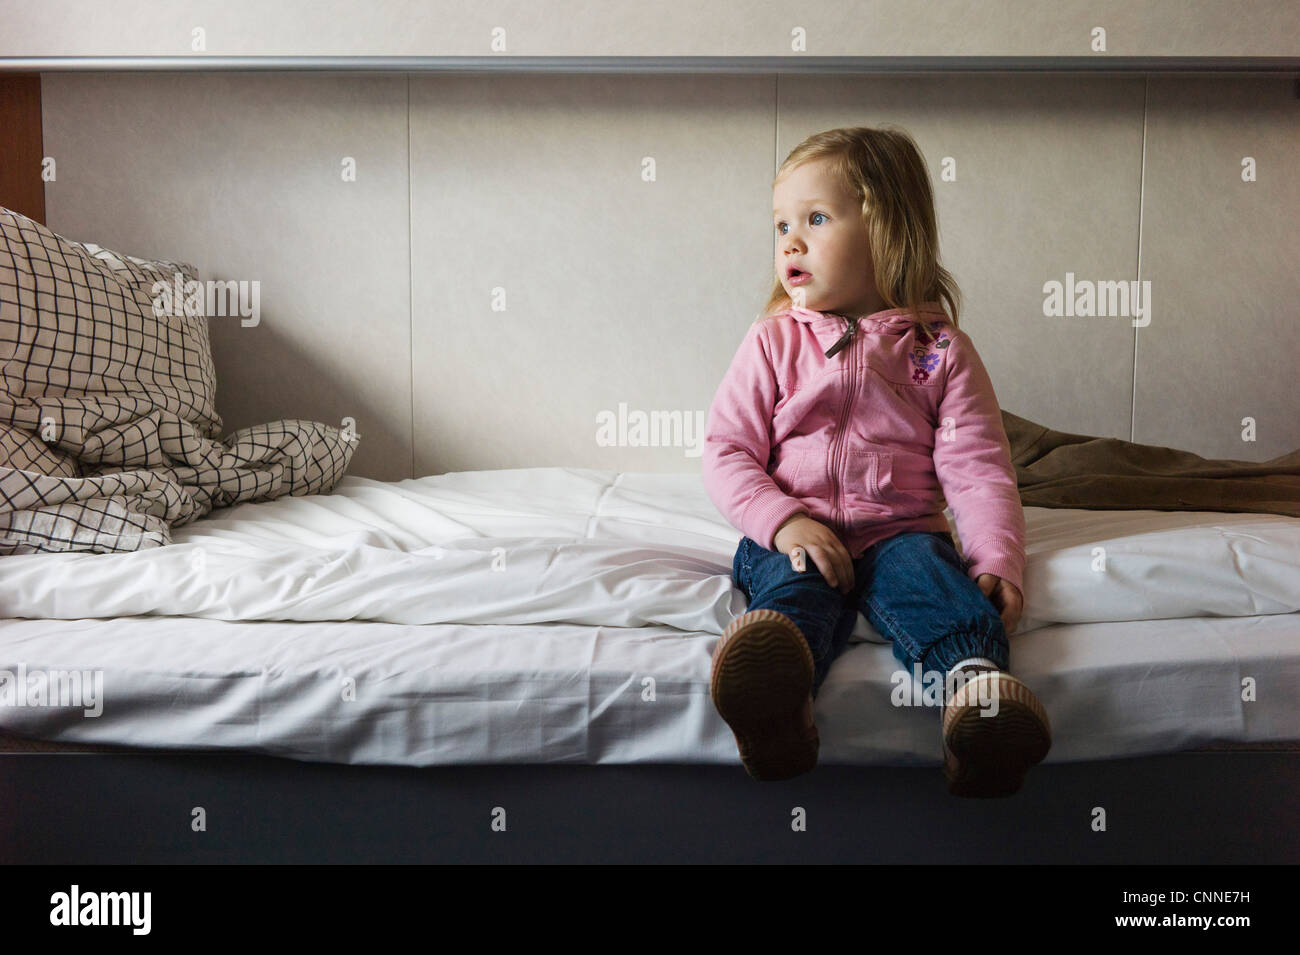 Girl Sitting on Bed, Sweden Stock Photo